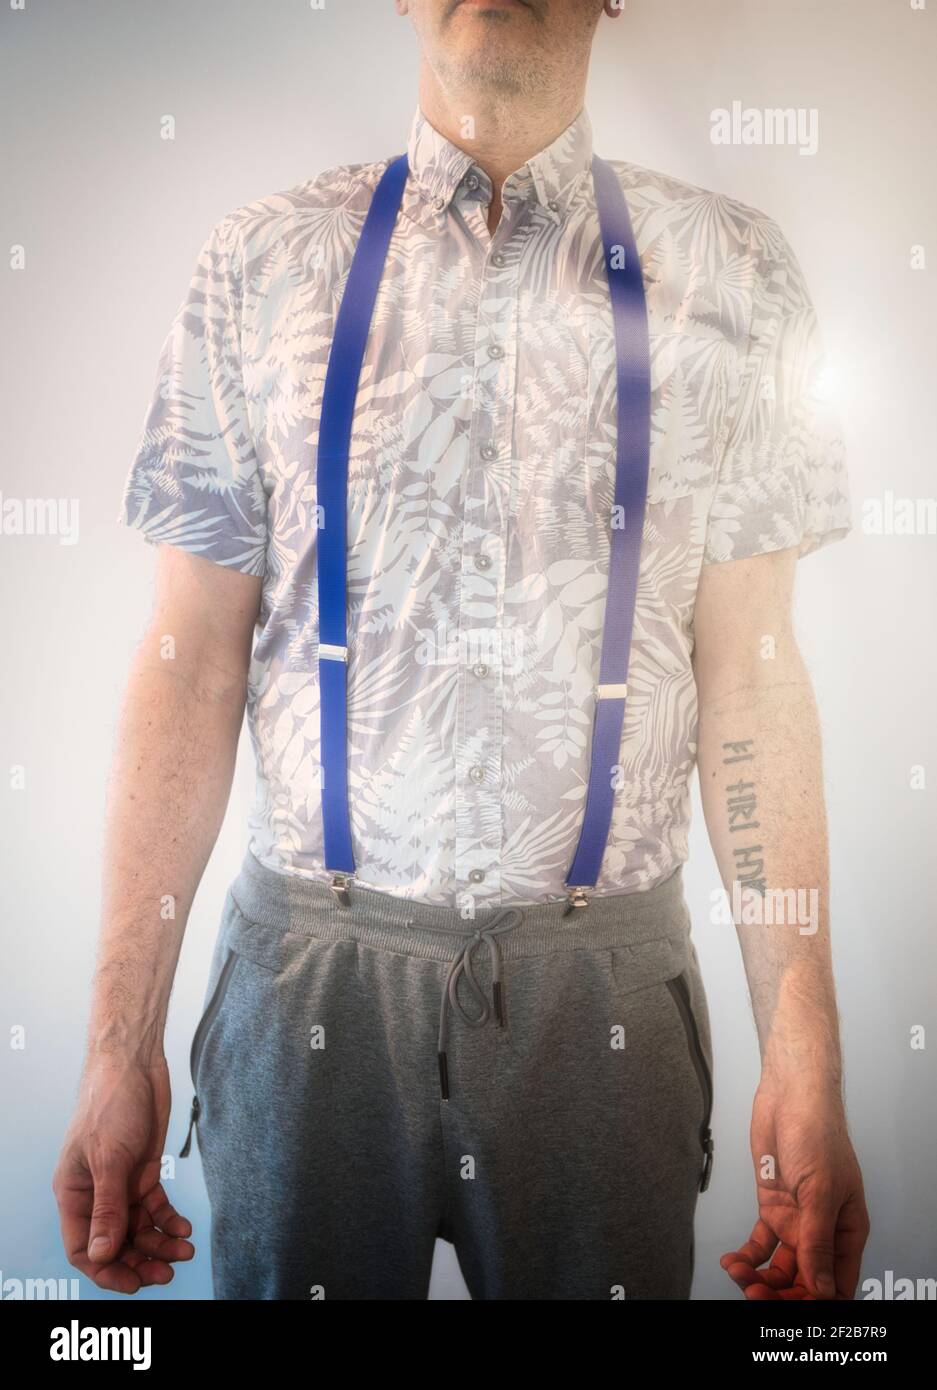 Mid adult man with arm tattoo standing in sunlight wearing suspenders, summer shirt and sweatpants. People, fashion, lifestyle concept Stock Photo